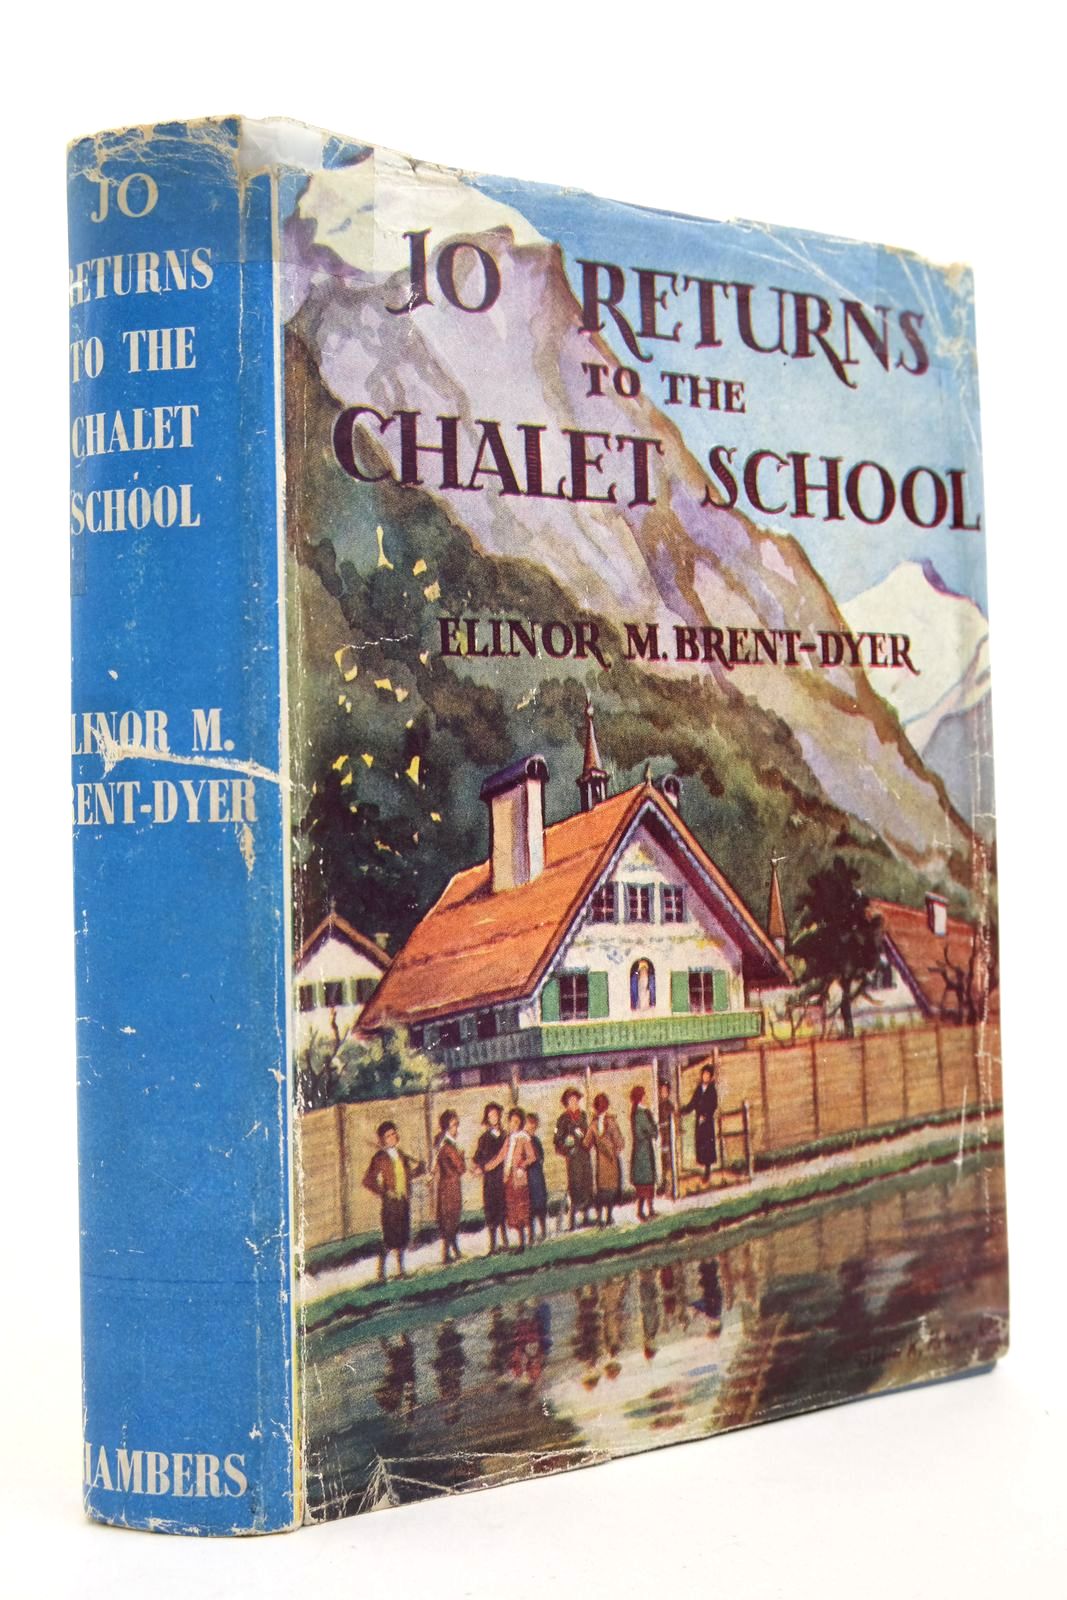 Photo of JO RETURNS TO THE CHALET SCHOOL written by Brent-Dyer, Elinor M. published by W. & R. Chambers Limited (STOCK CODE: 2140081)  for sale by Stella & Rose's Books